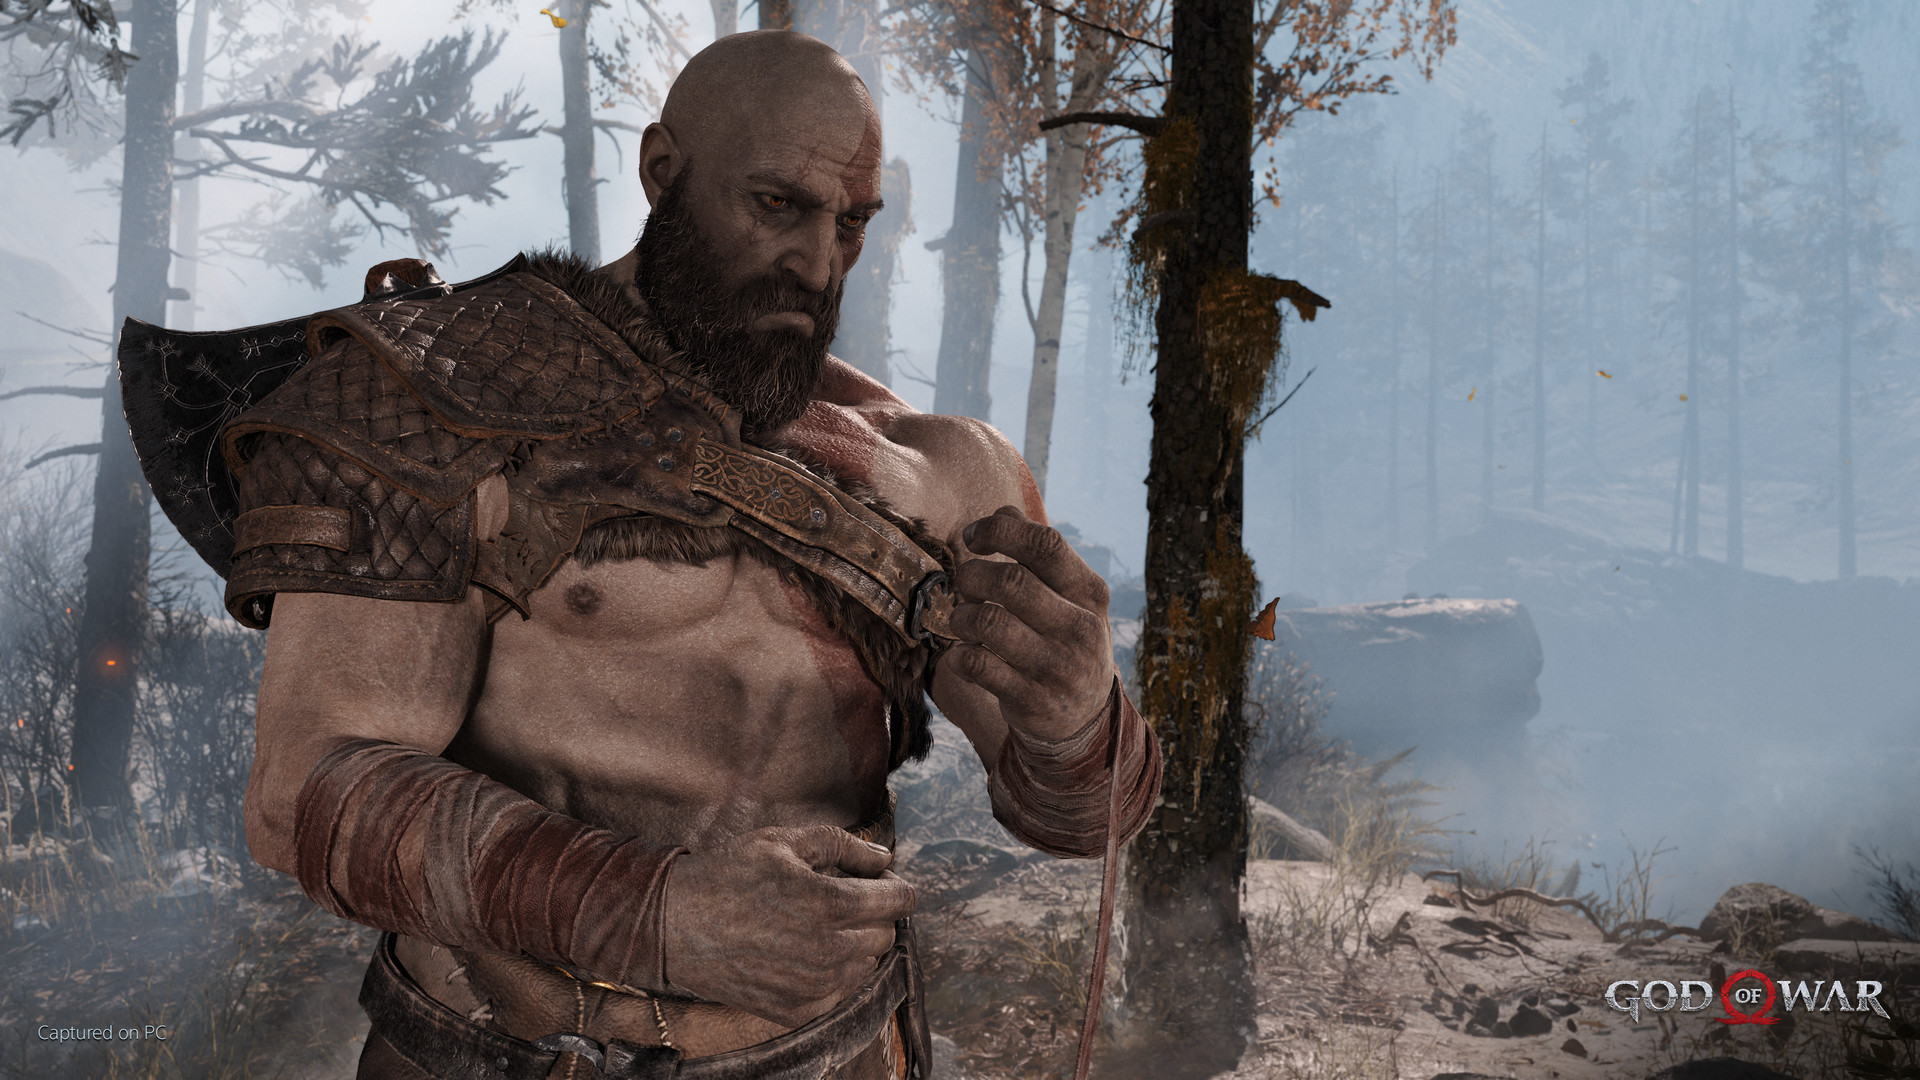 God of War PC review